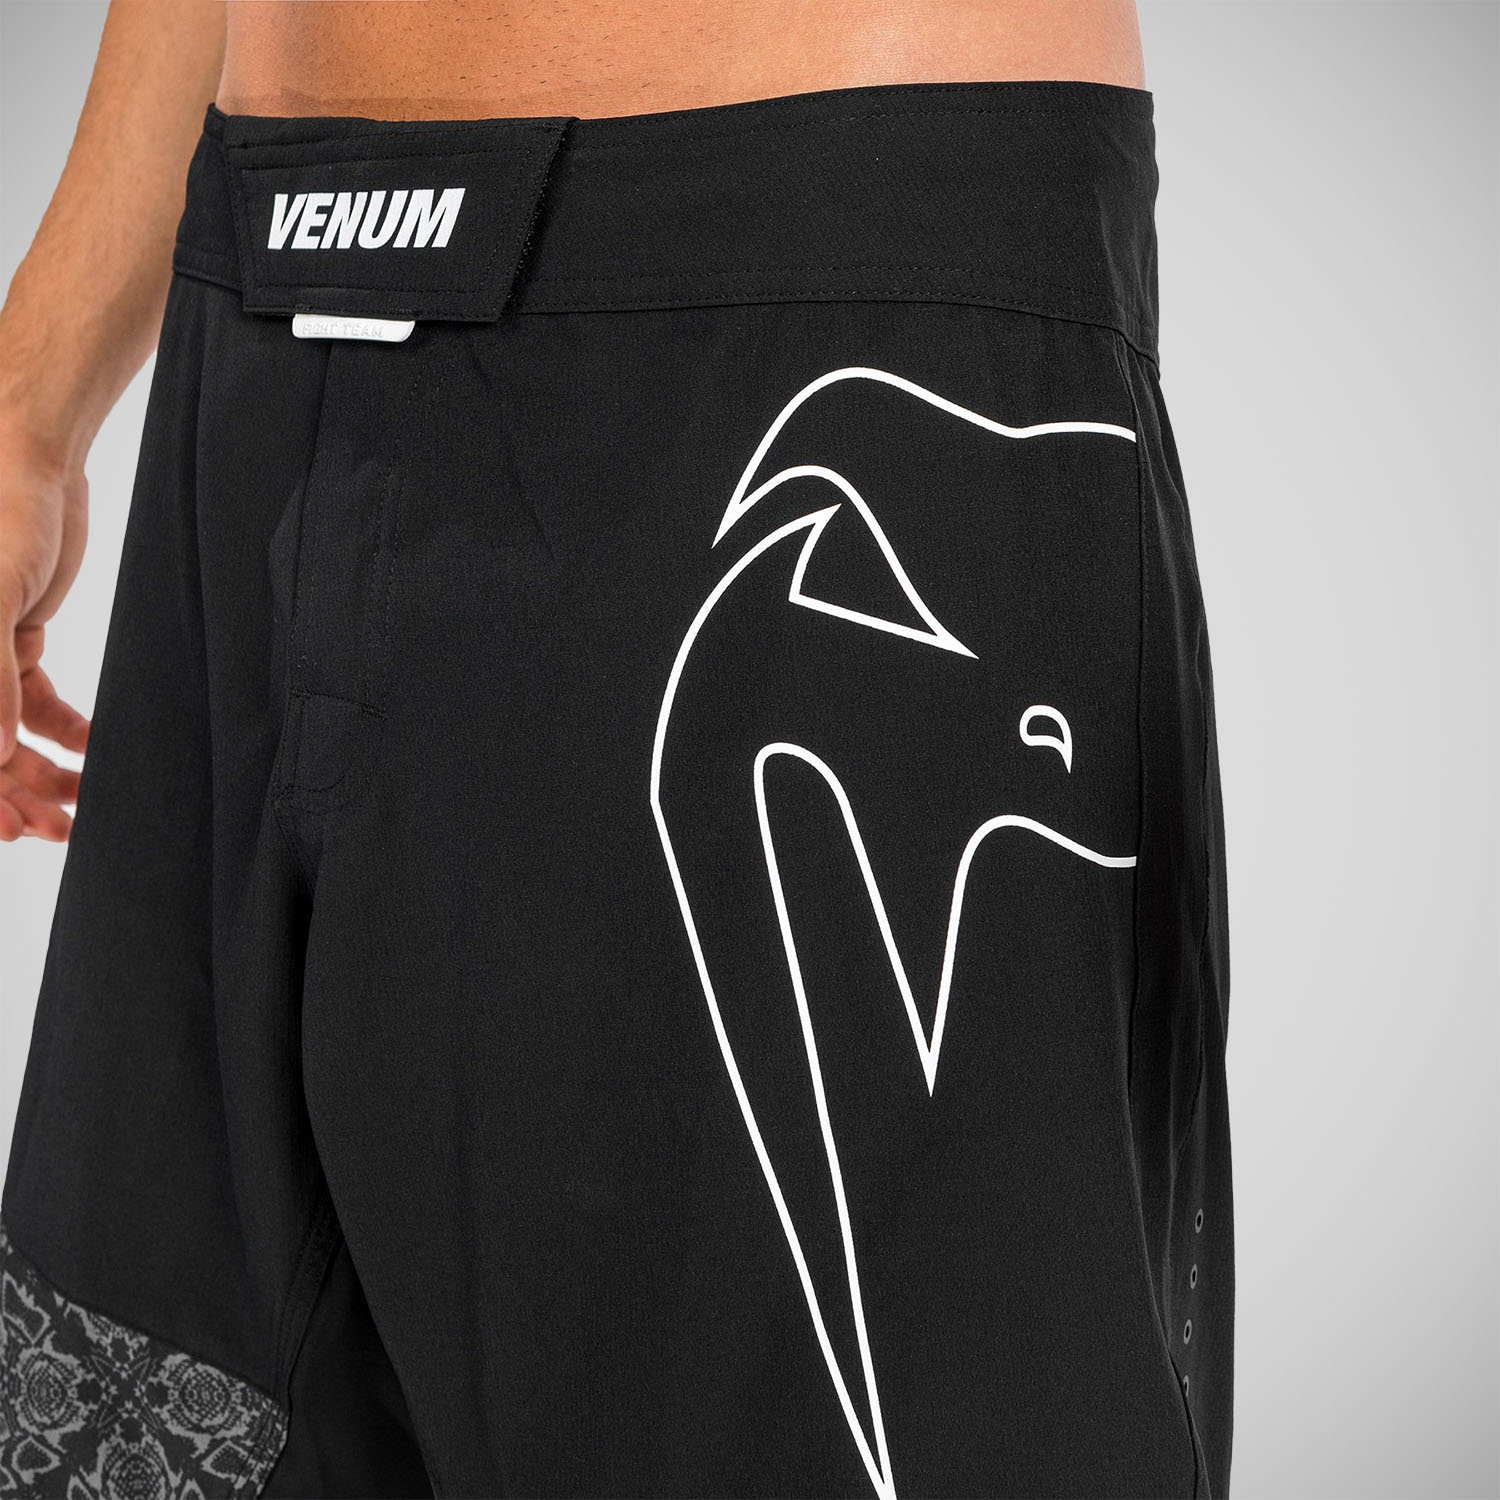 Black/White Venum Light 4.0 Fight Shorts from Made4Fighters